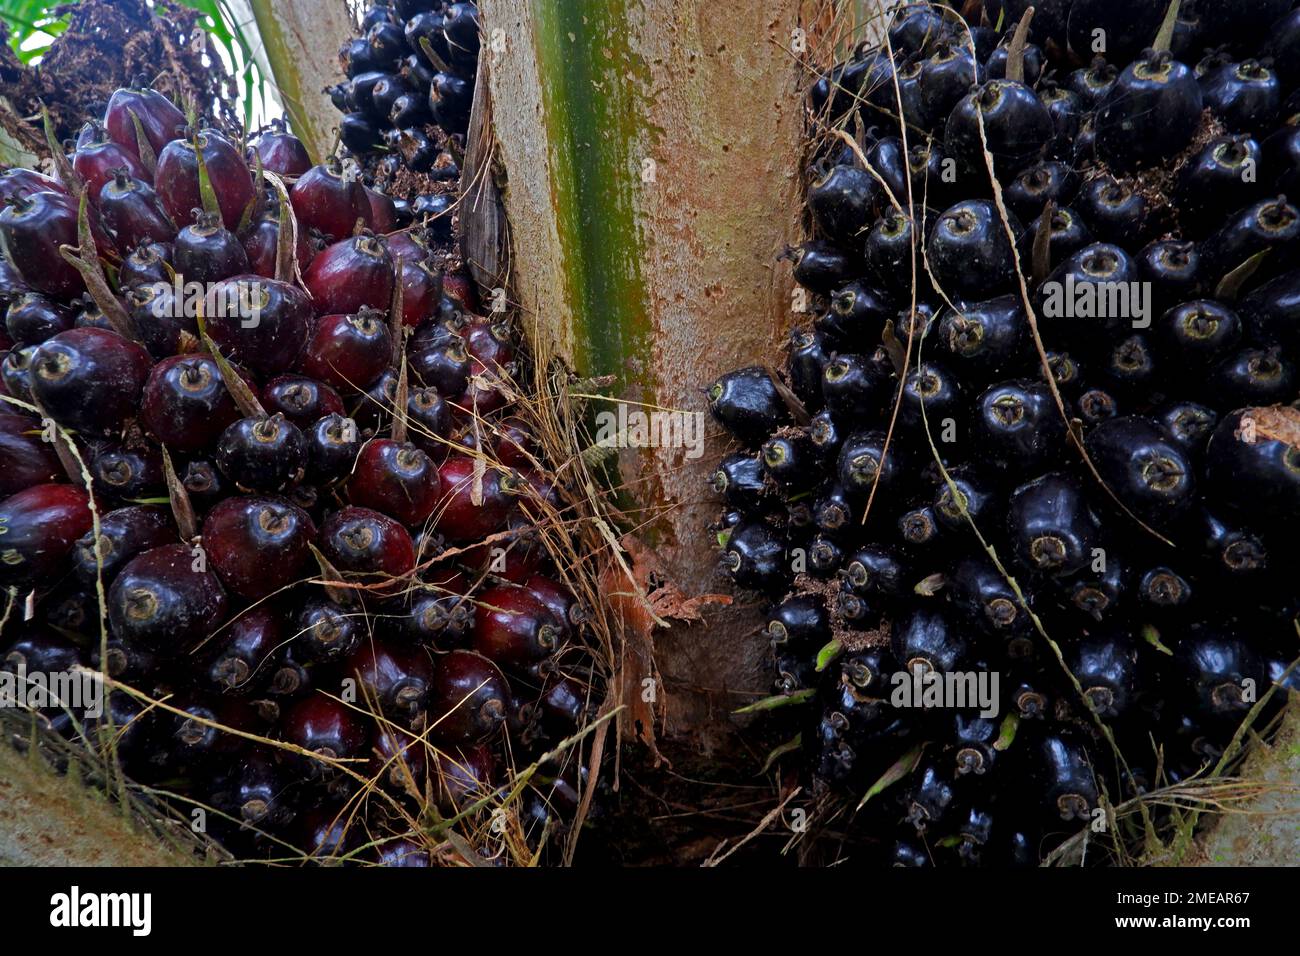 A Medium Close Up View Of Oil Palm Fruit On A Tree, In Western Indonesia Stock Photo